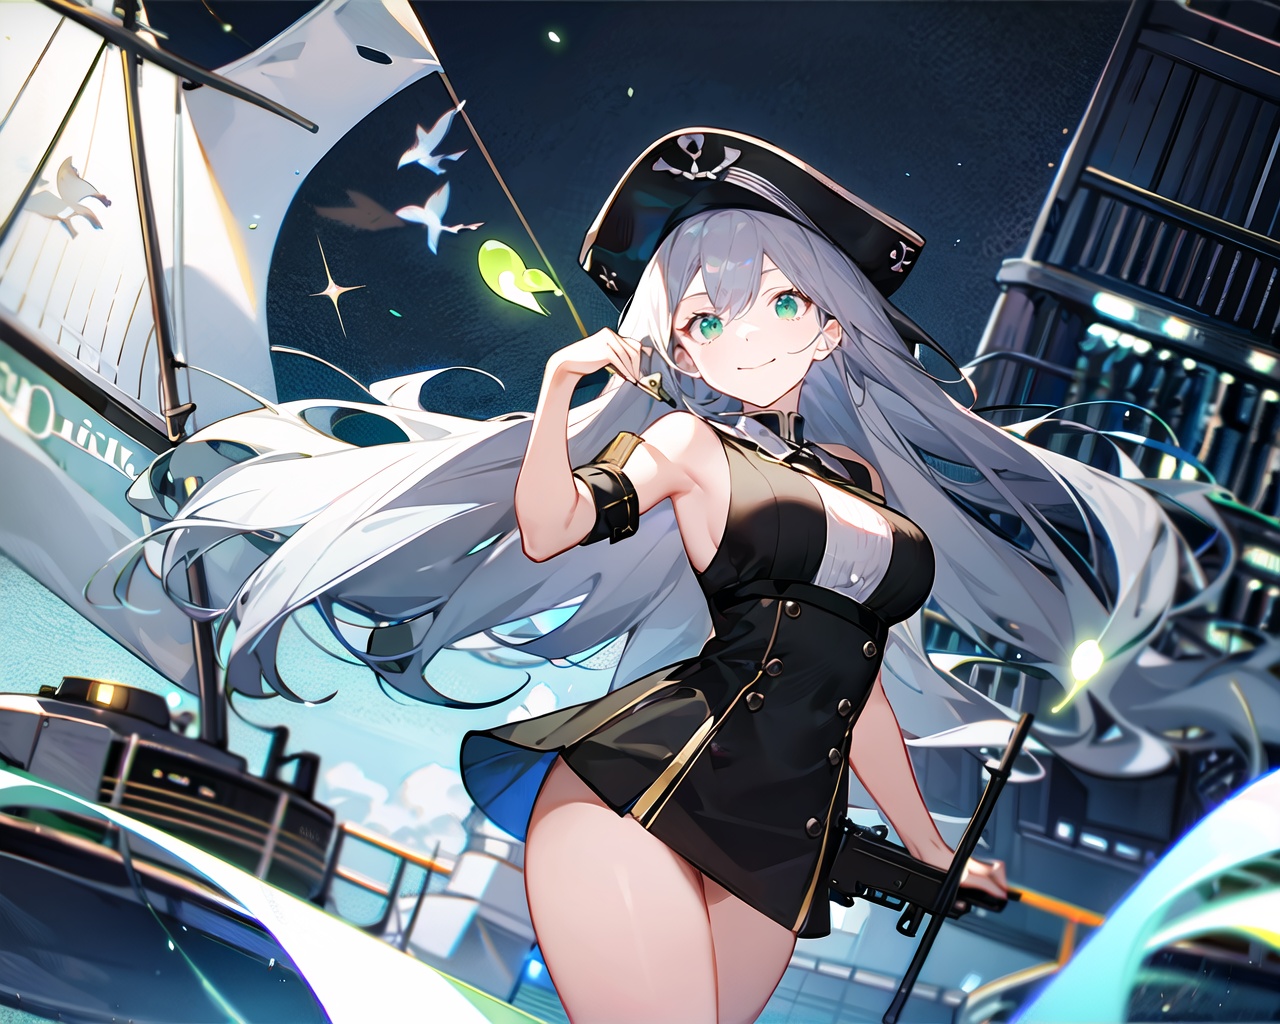 masterpiece,best quality),(detail face,perfect face),(cowboy_shot:1.3),Dynamic angle,1girl,pirate,glowing_eye,pirate_hat,silver hair,leather,dress,military_uniform,posing,smile,very_long_hair,),hair_spread_out,holding_gun,outdoors,ship deck,mast,sail,ocean,(night:1.1),(complex background:1.1),(green ghost fly),bright,green light,glowing,illuminatio,particle effects,Balance and coordination between all things,black_green theme,